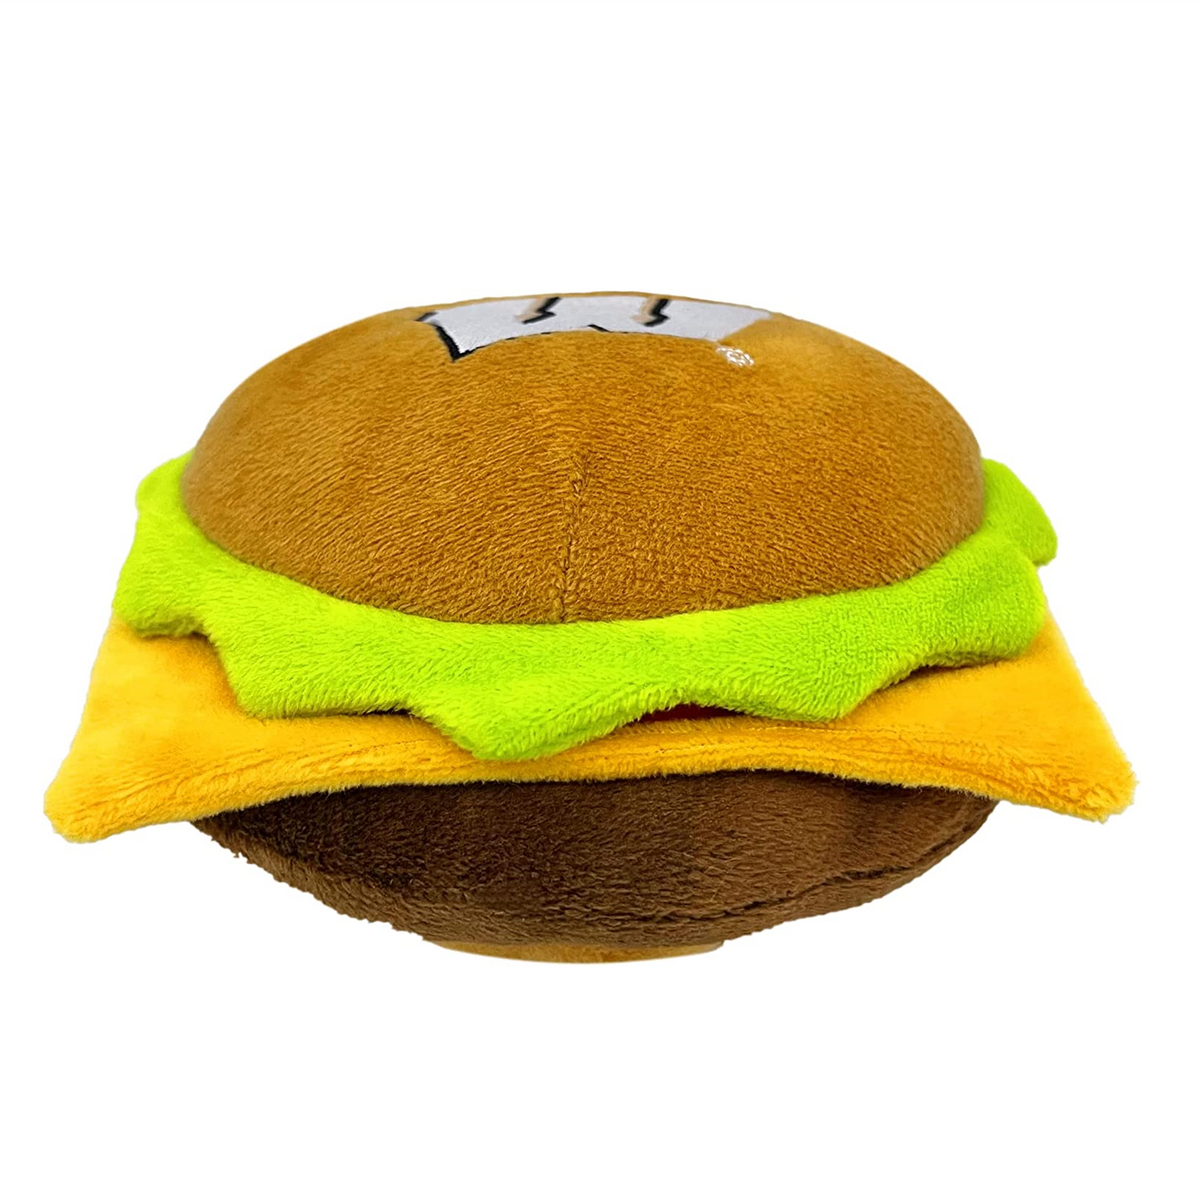 WI Badgers Hamburger Plush Toys - 3 Red Rovers